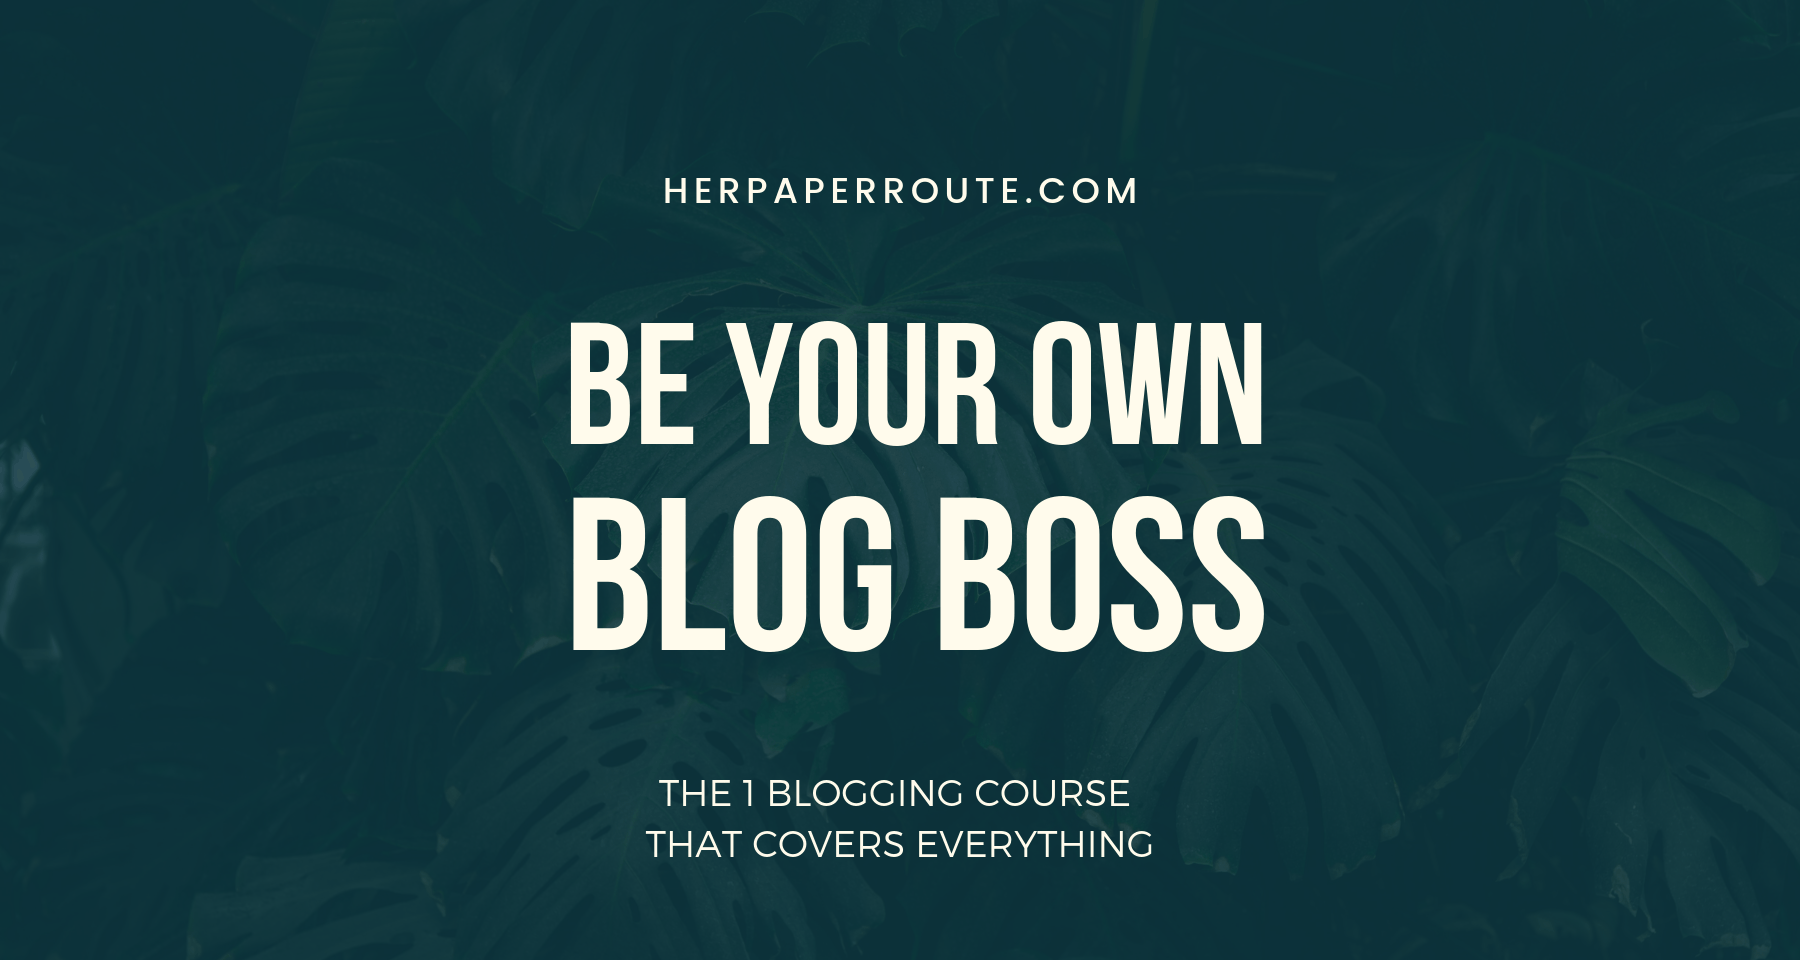 Best make money blogging course be your own blog boss monetization how to make money blogging best online course for bloggers Be Your Own Blog Boss HerPaperRoute